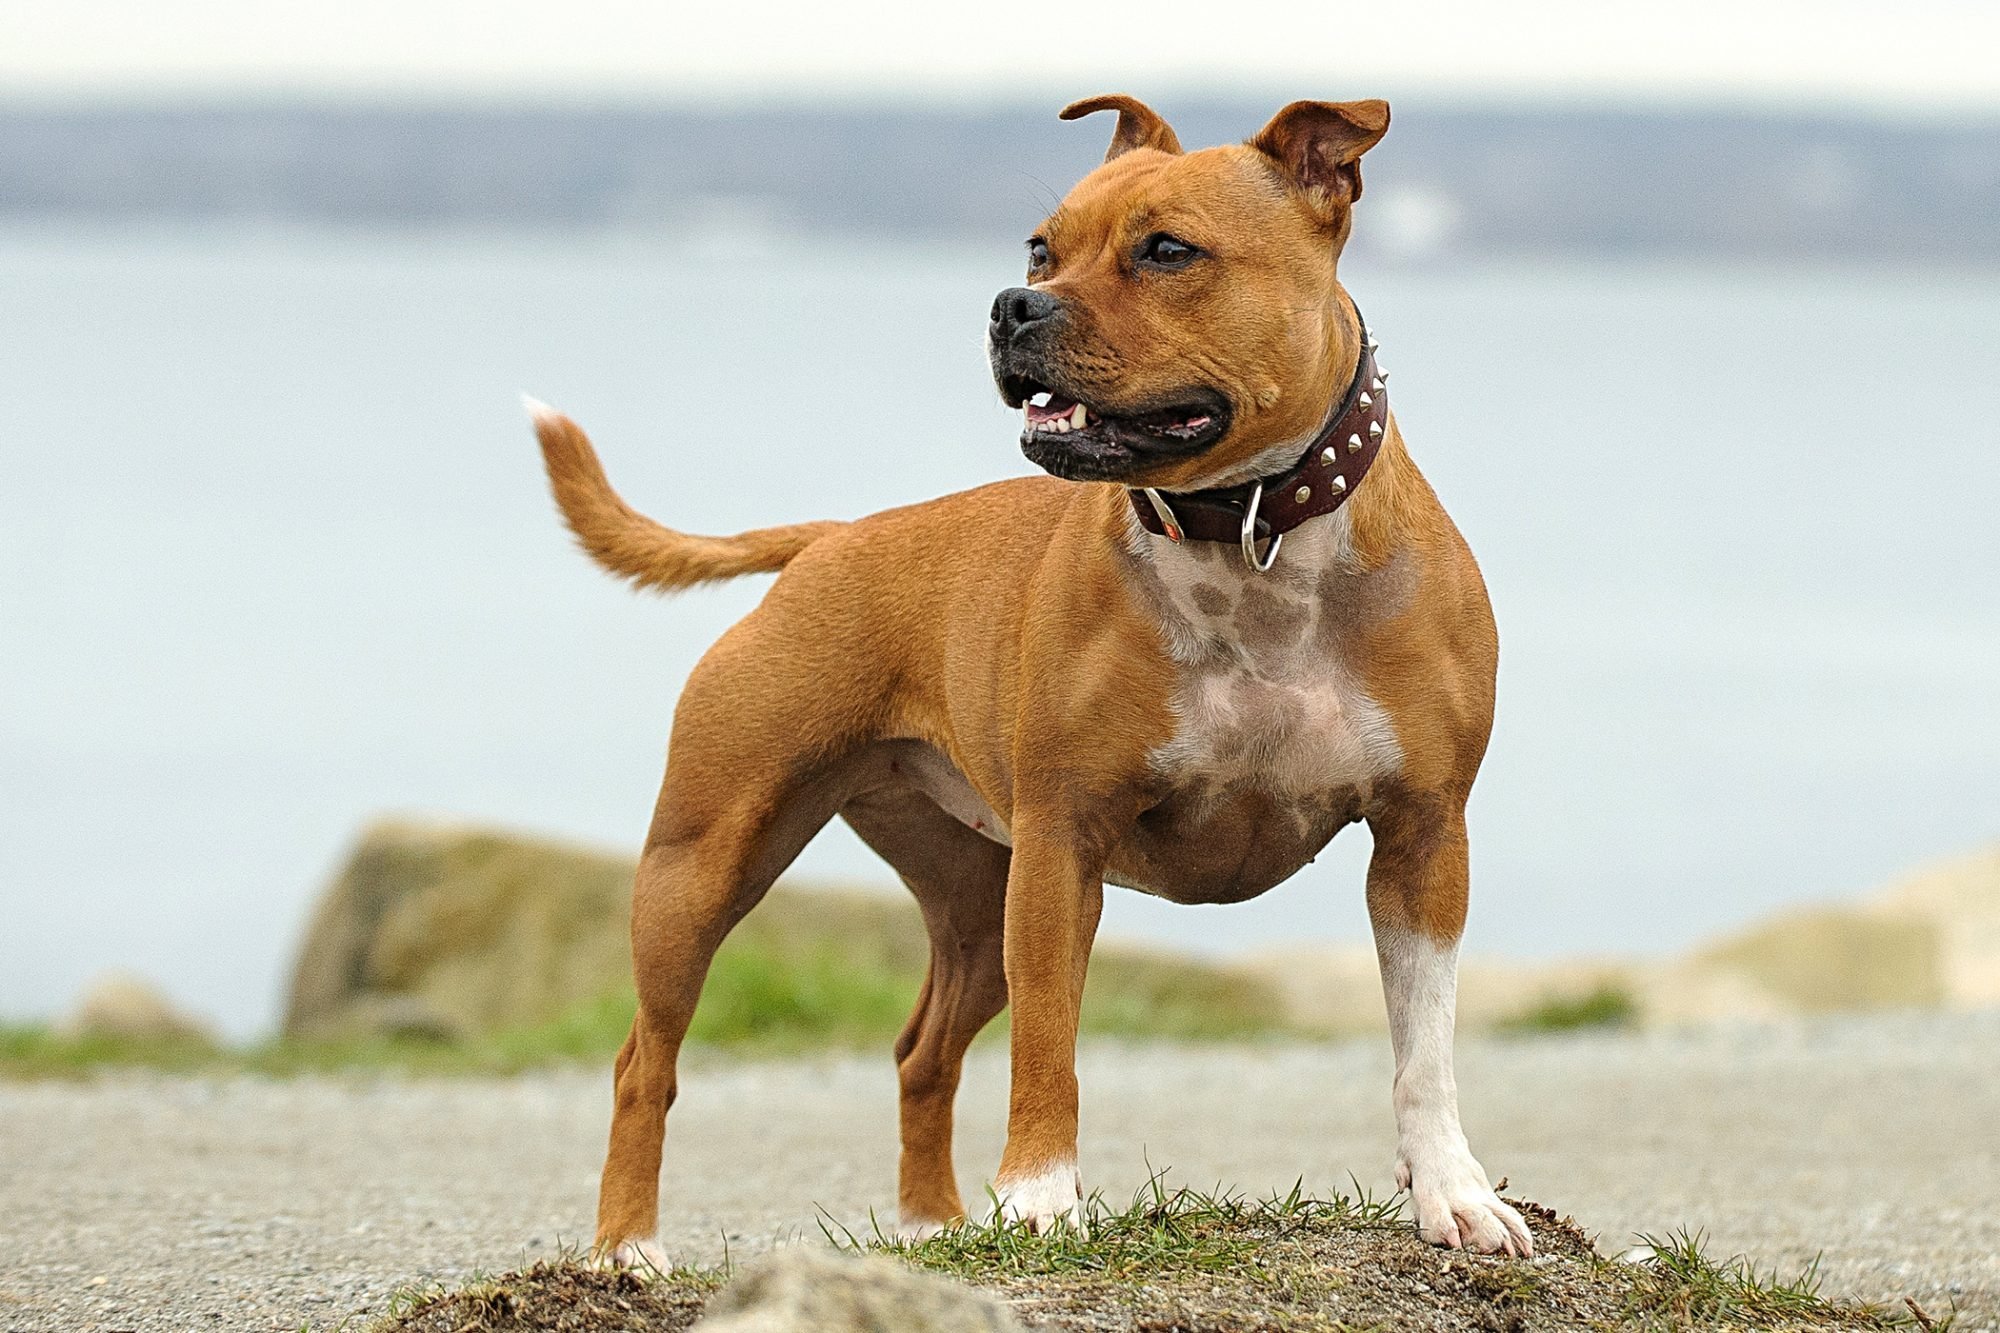 The 5 Different Types of Pit Bull Dog Breeds—and Why They Can Make Great Pets